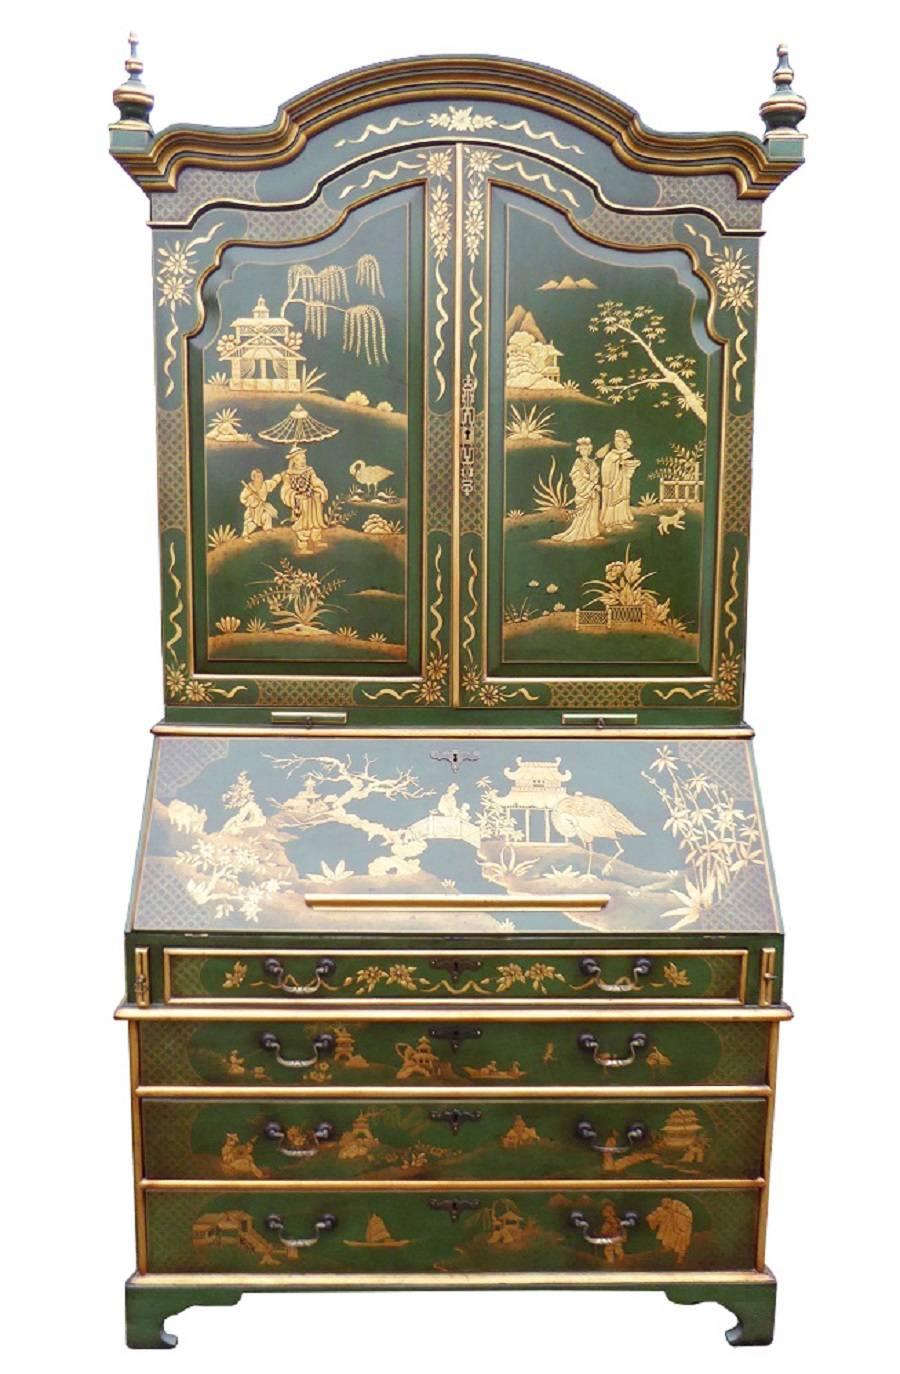 For sale is a good quality 19th century and later decorated chinoiserie Bureau bookcase. The top of the bookcase has two panelled doors, both profusely decorated with chinoiserie, opening to reveal a fully fitted cream interior comprising various